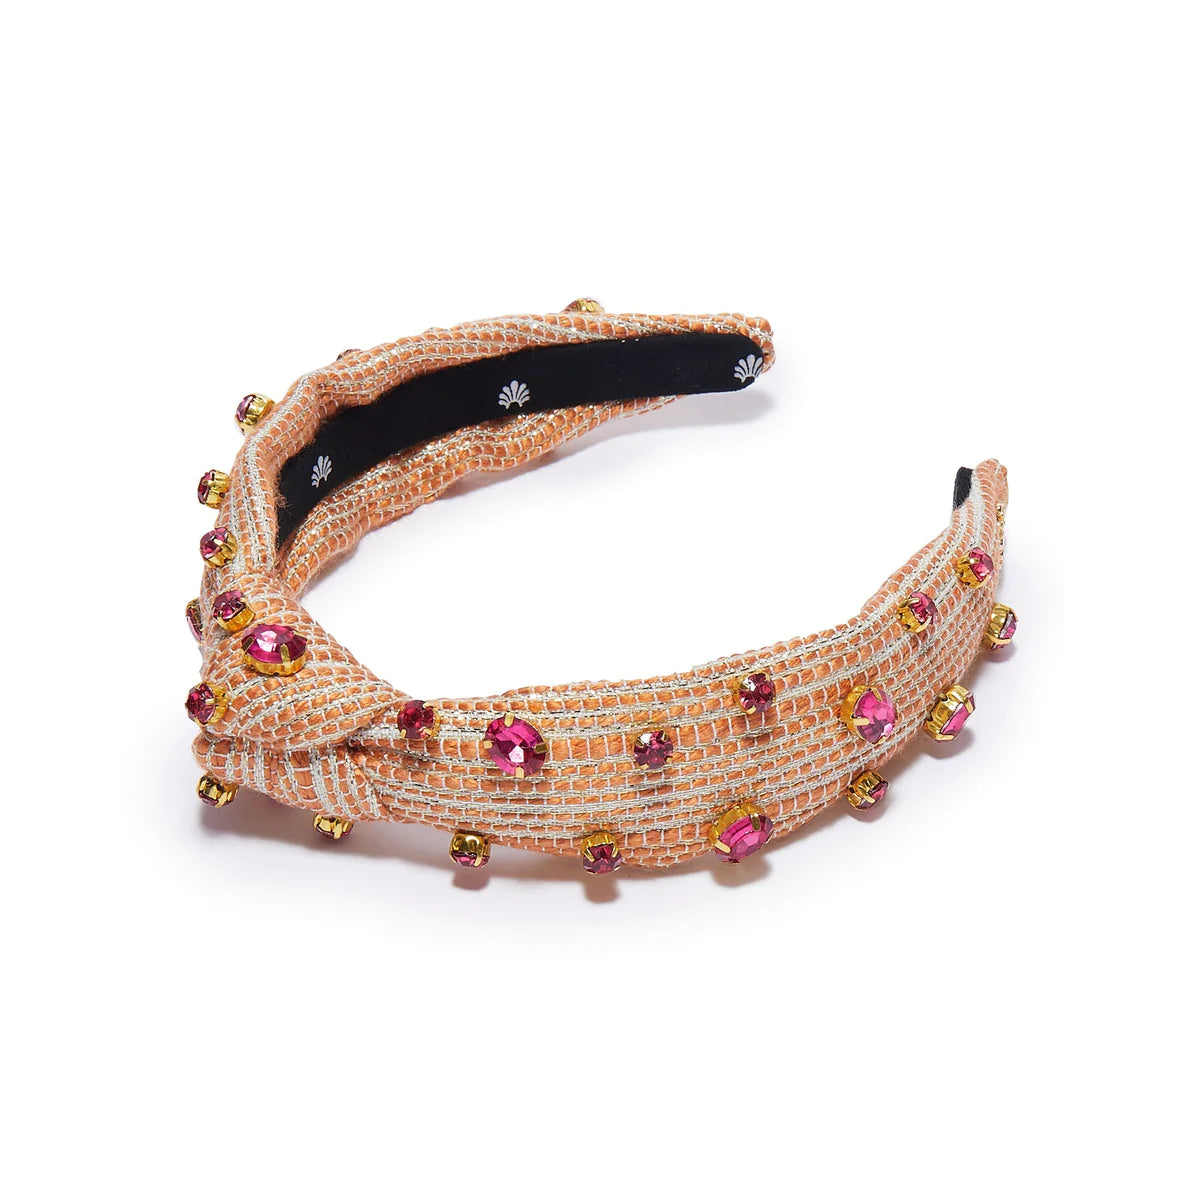 Soft Coral Kids Tweed Oval Crystal Knotted Headband